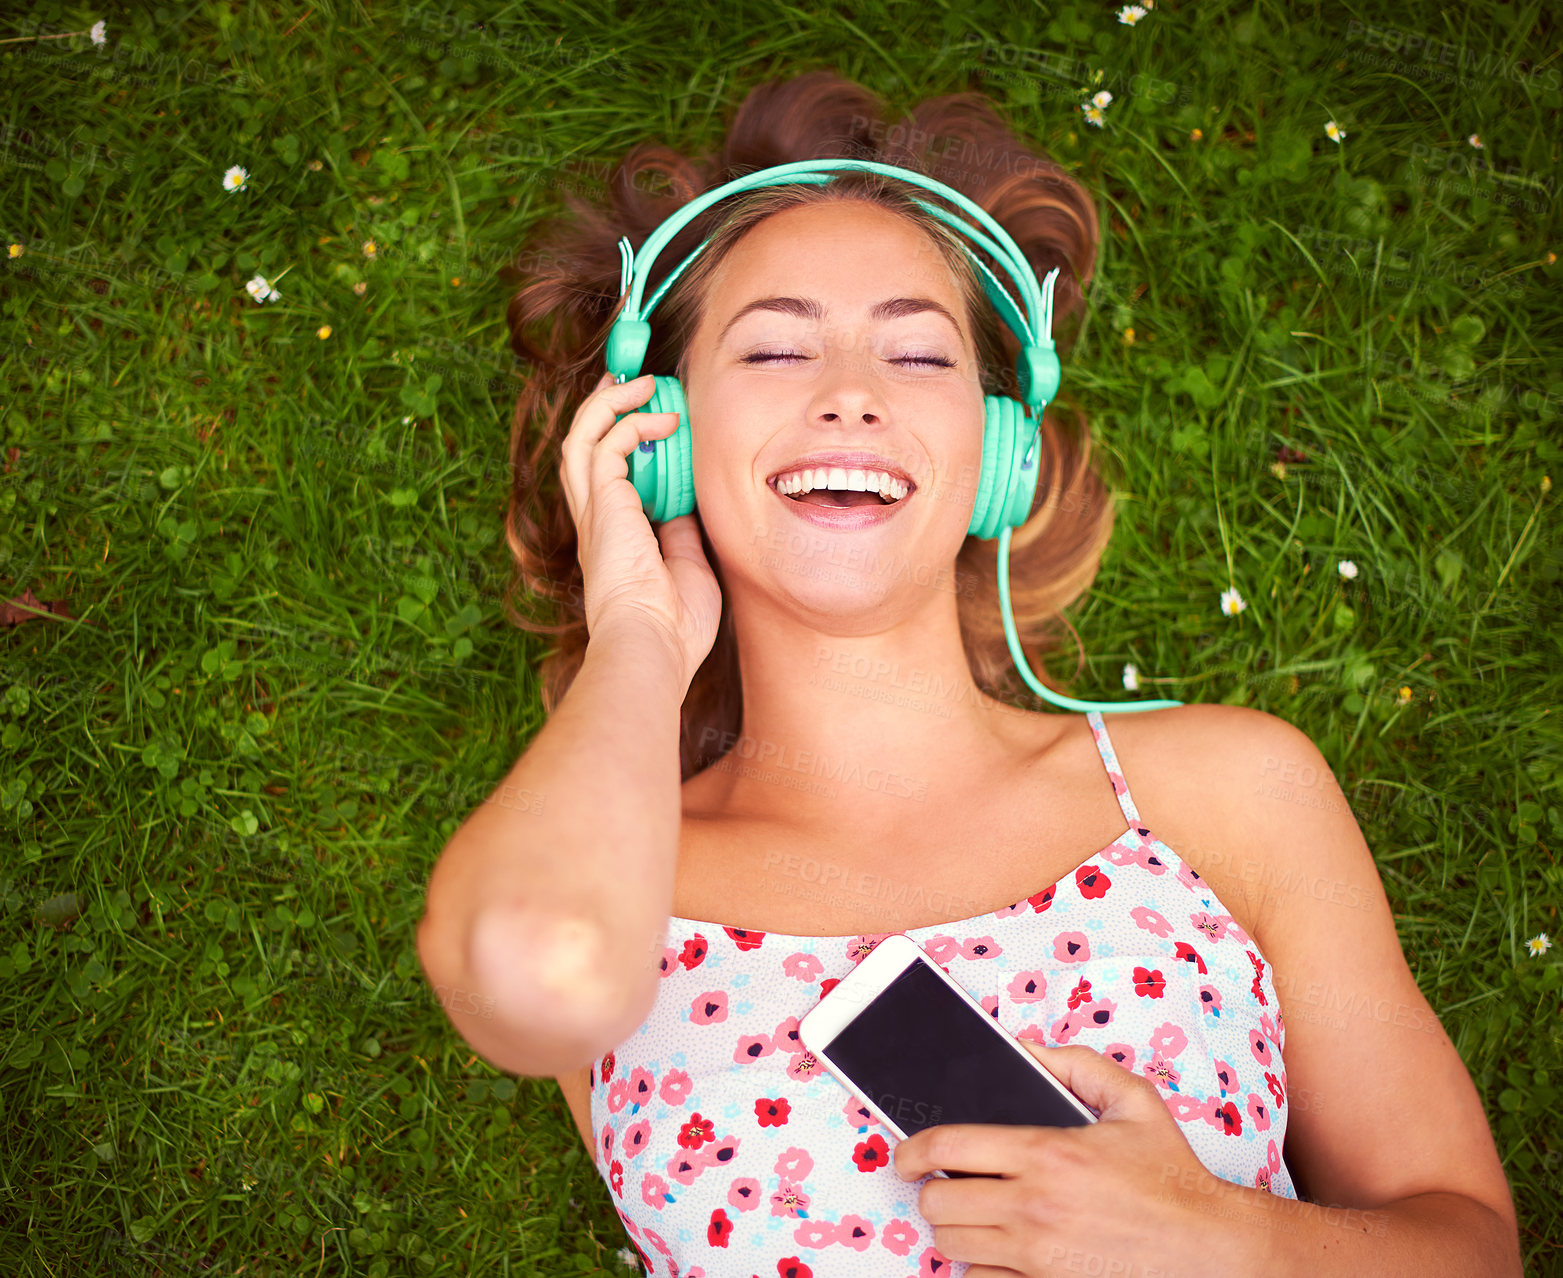 Buy stock photo Shot of a young woman listening to music while lying on the grass